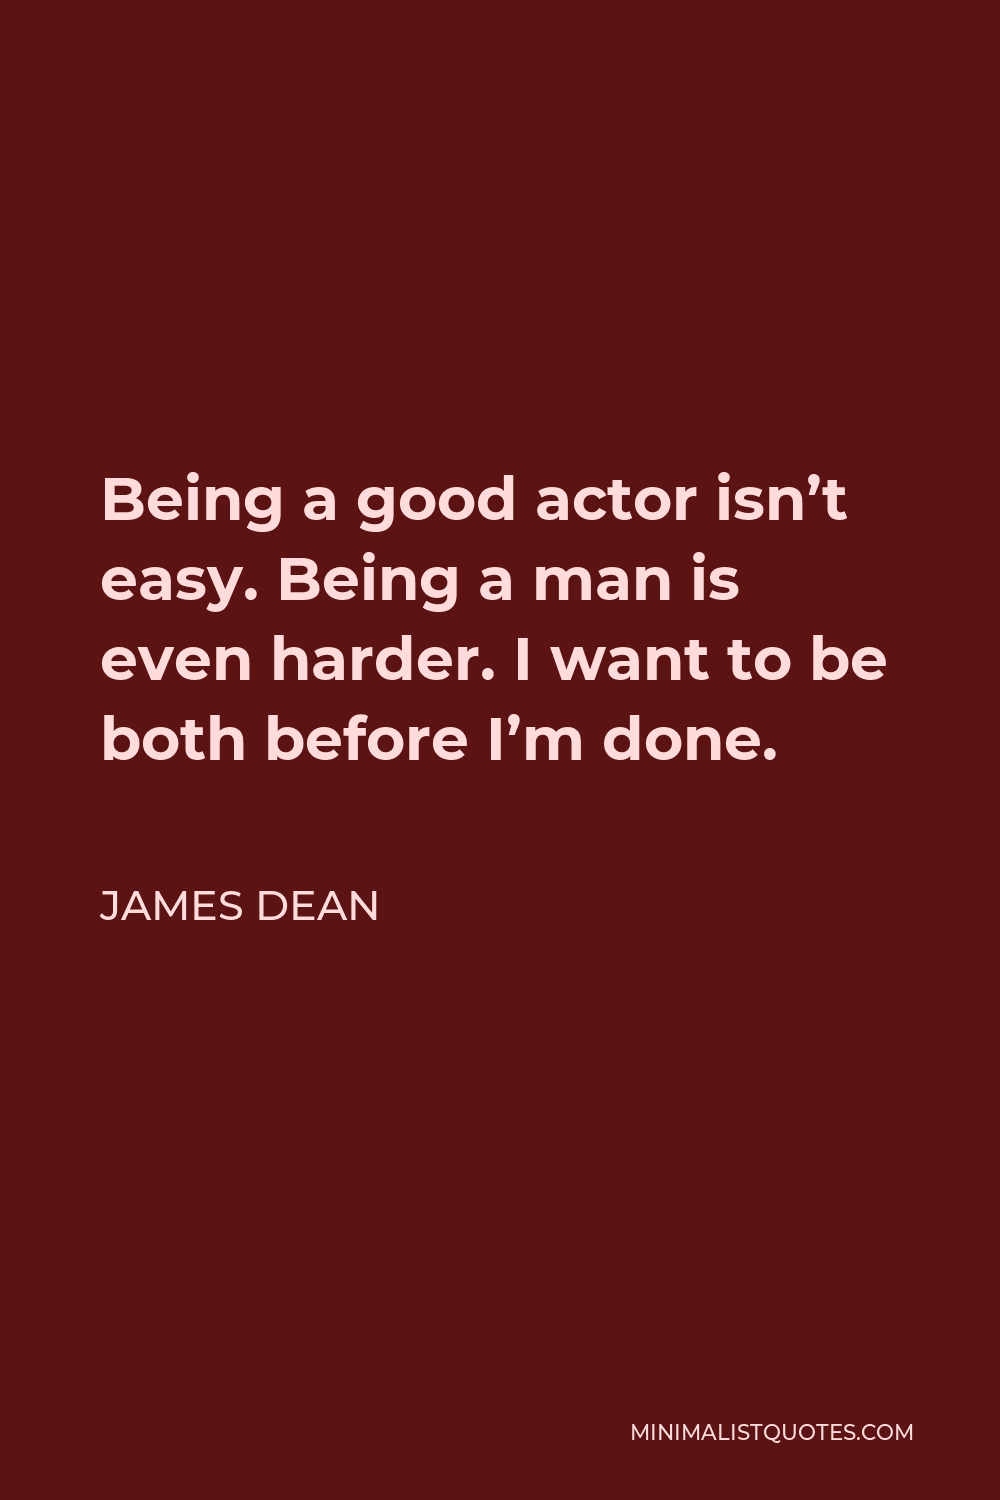 James Dean Quote - Being a good actor isn’t easy. Being a man is even harder. I want to be both before I’m done.